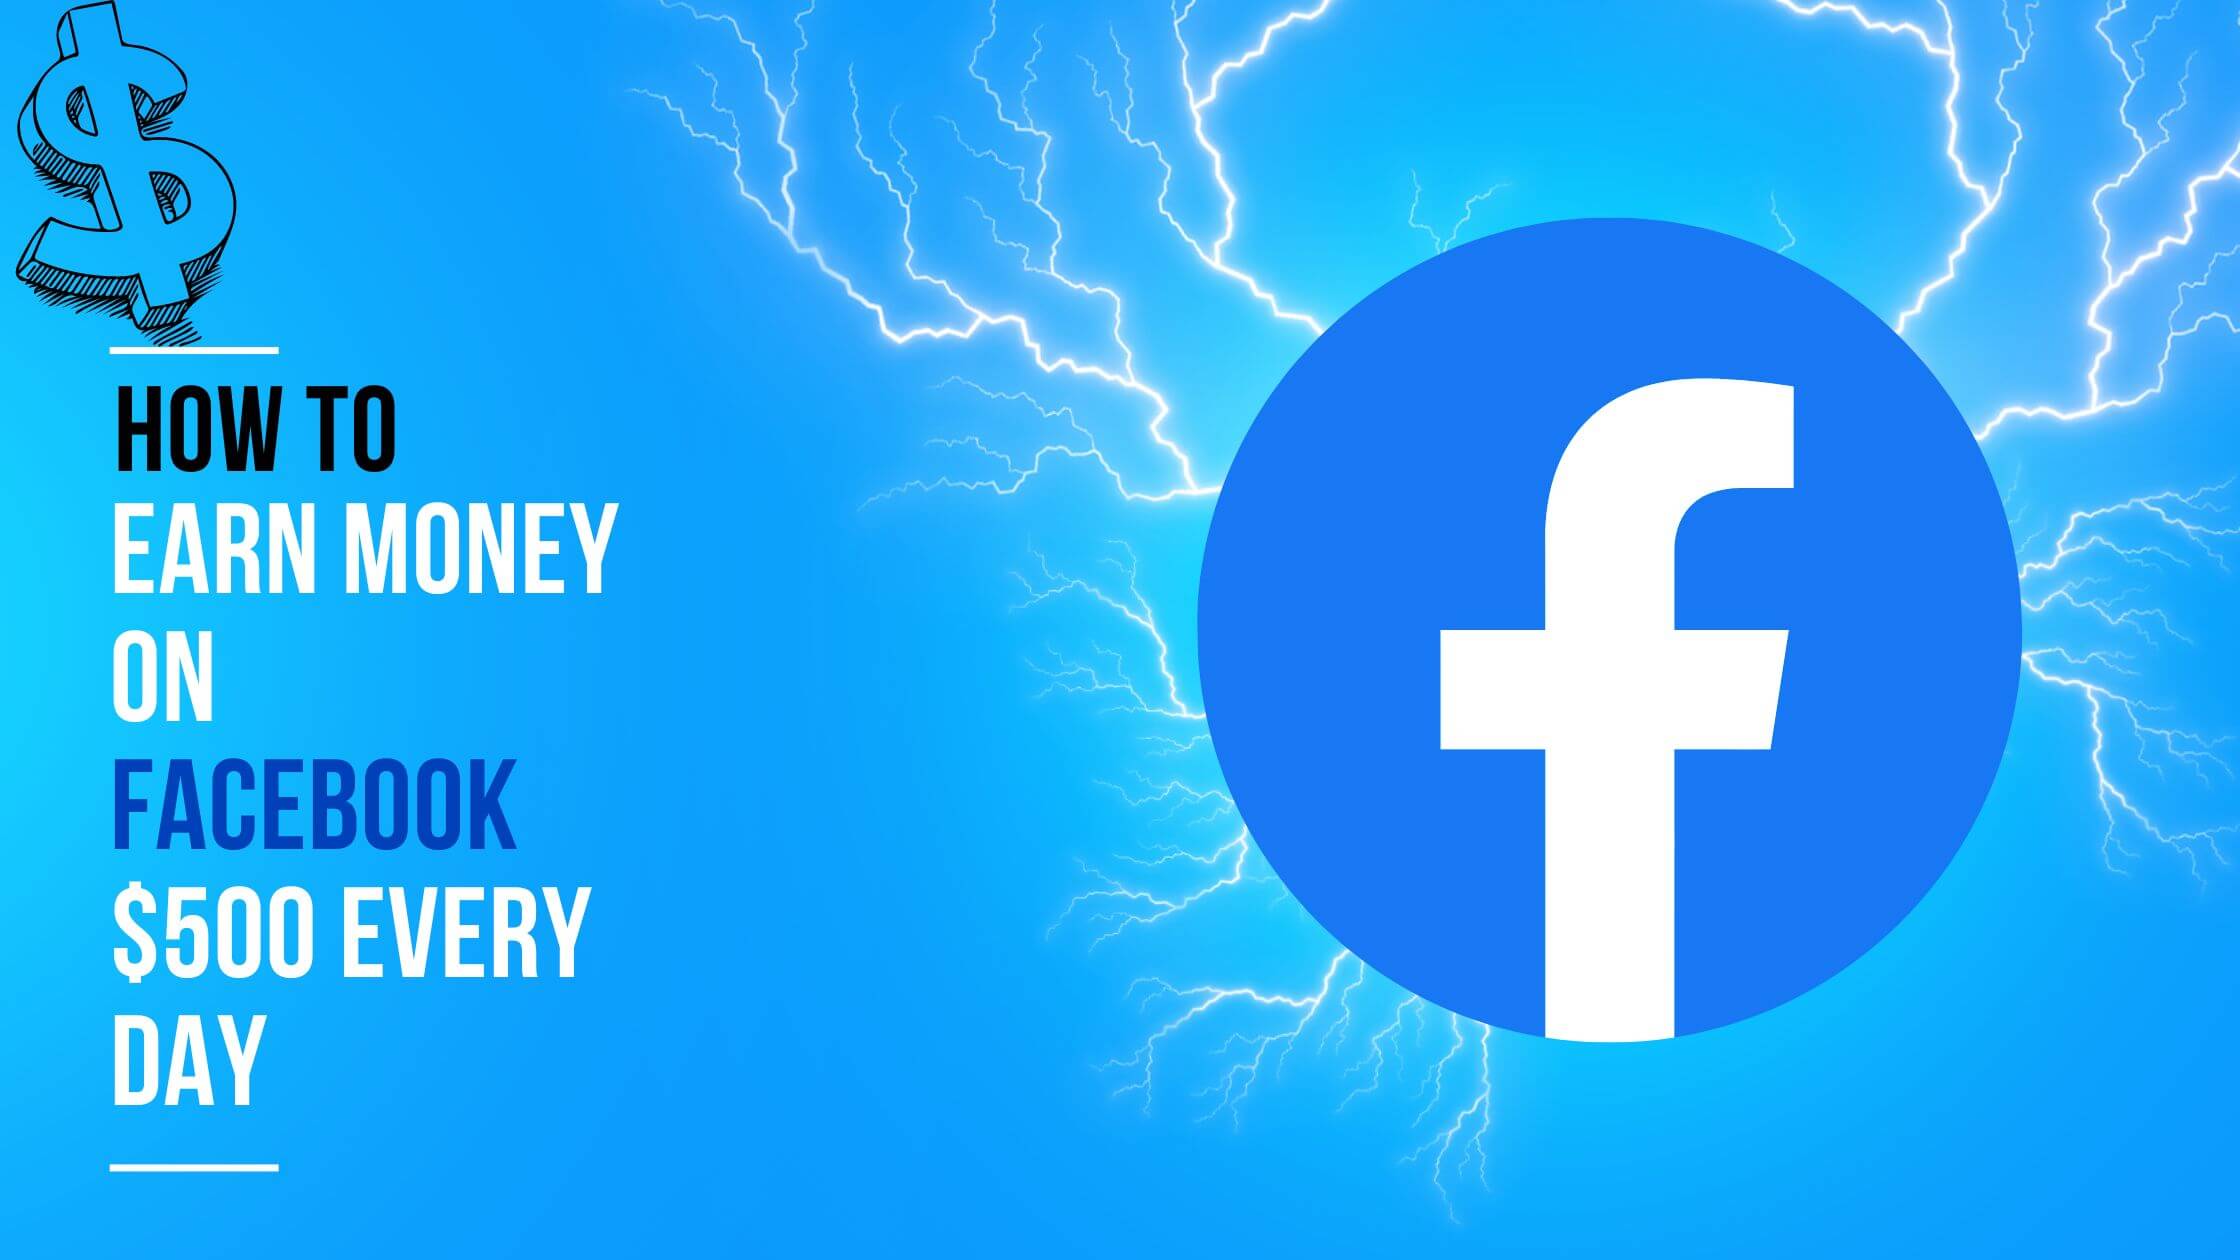 How To Earn Money On Facebook $500 Every Day